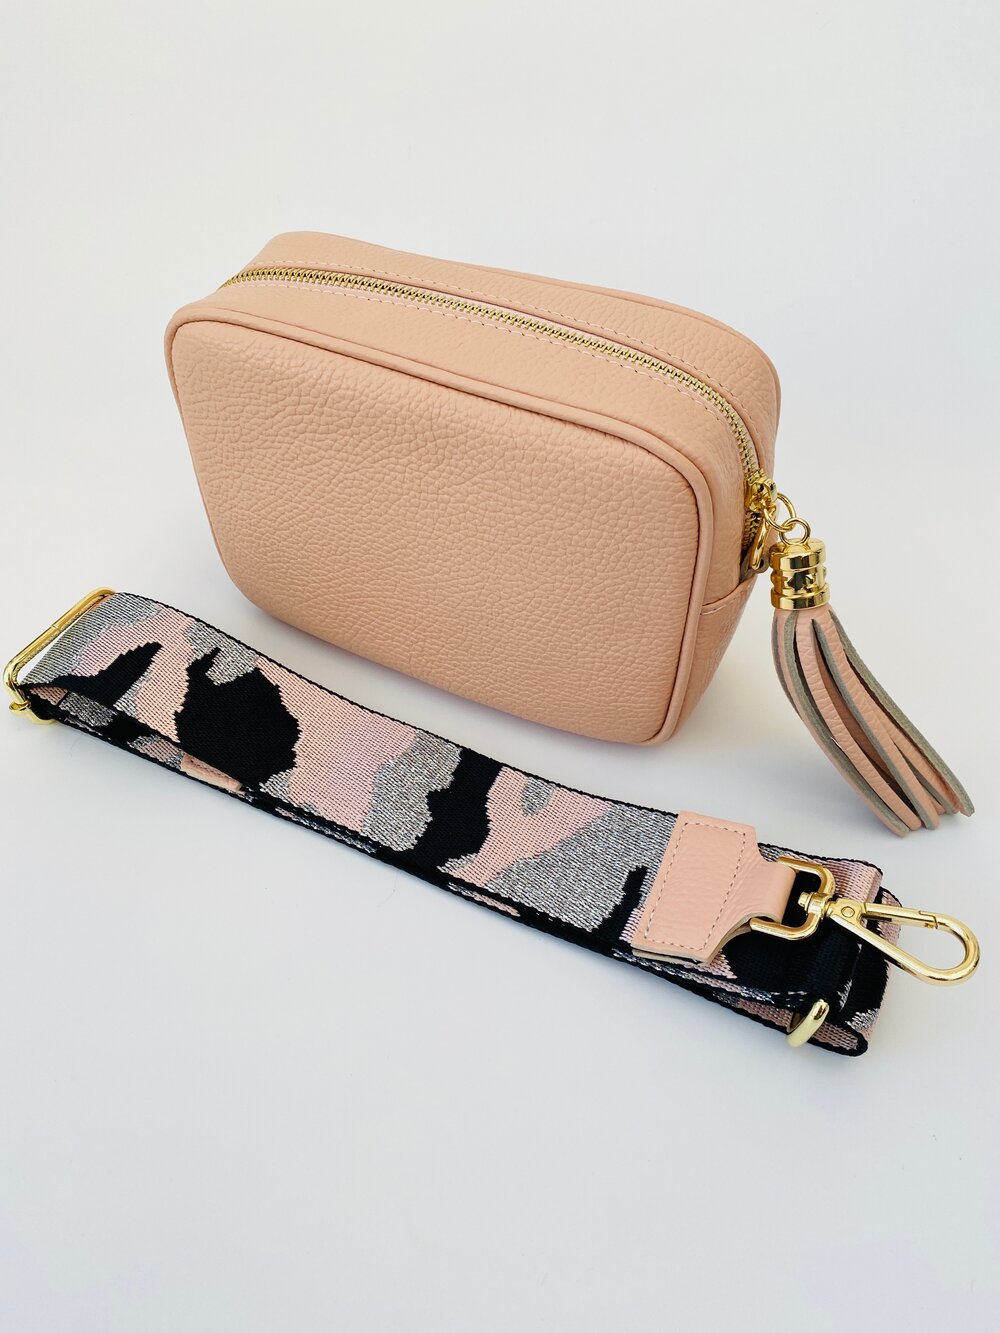 The Lily Crossbody Shoulder Bag with Wide Strap